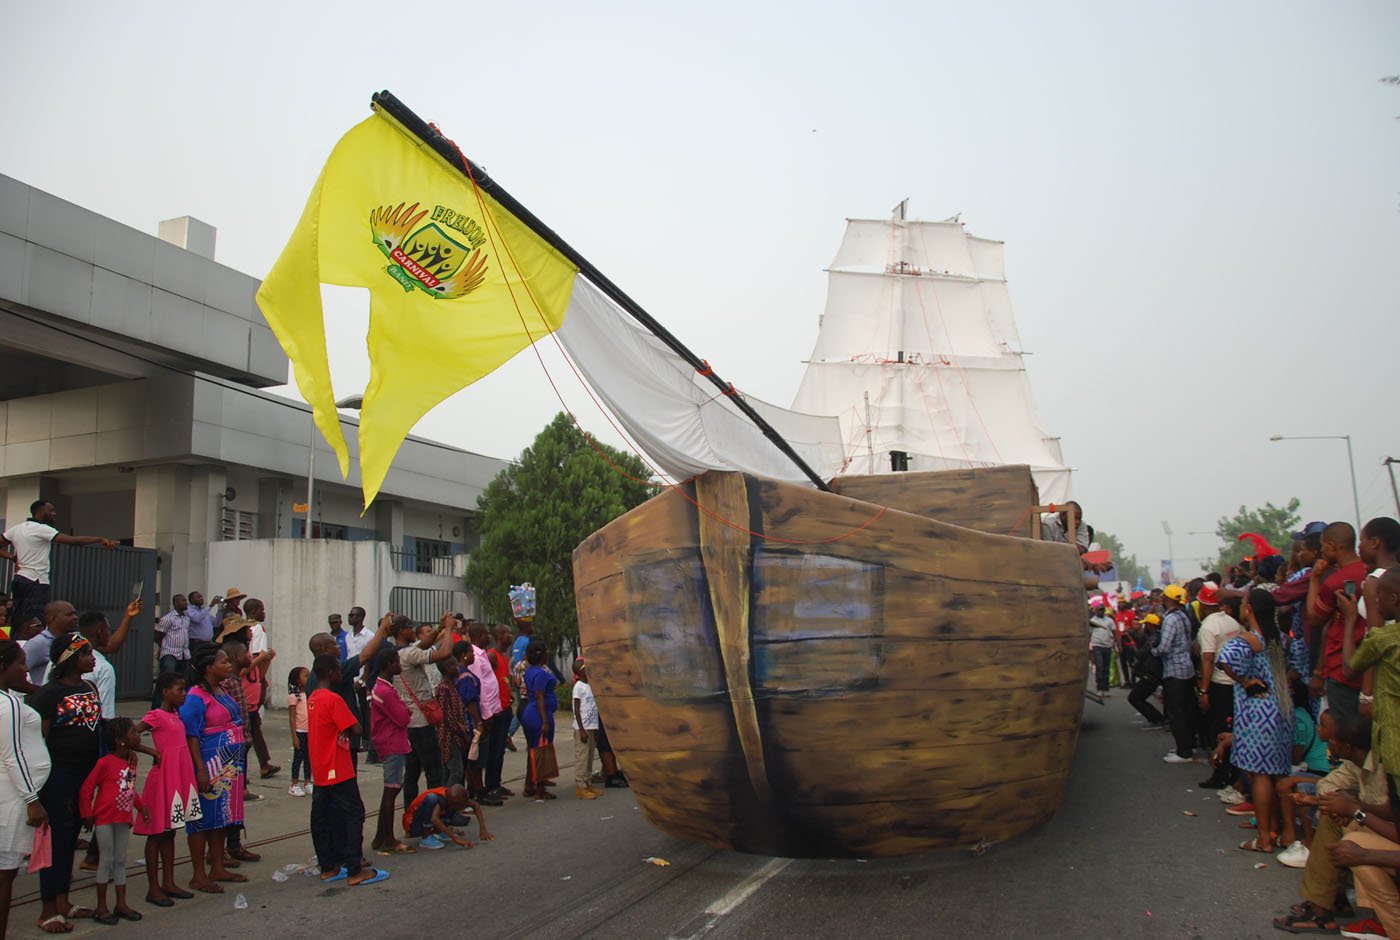 A Dummy Ship Designed by Freedom Band during the Main Event of the 2017 Carnival Calabar in Cross River State Yesterday. Photo: Nwankpa Chijioke